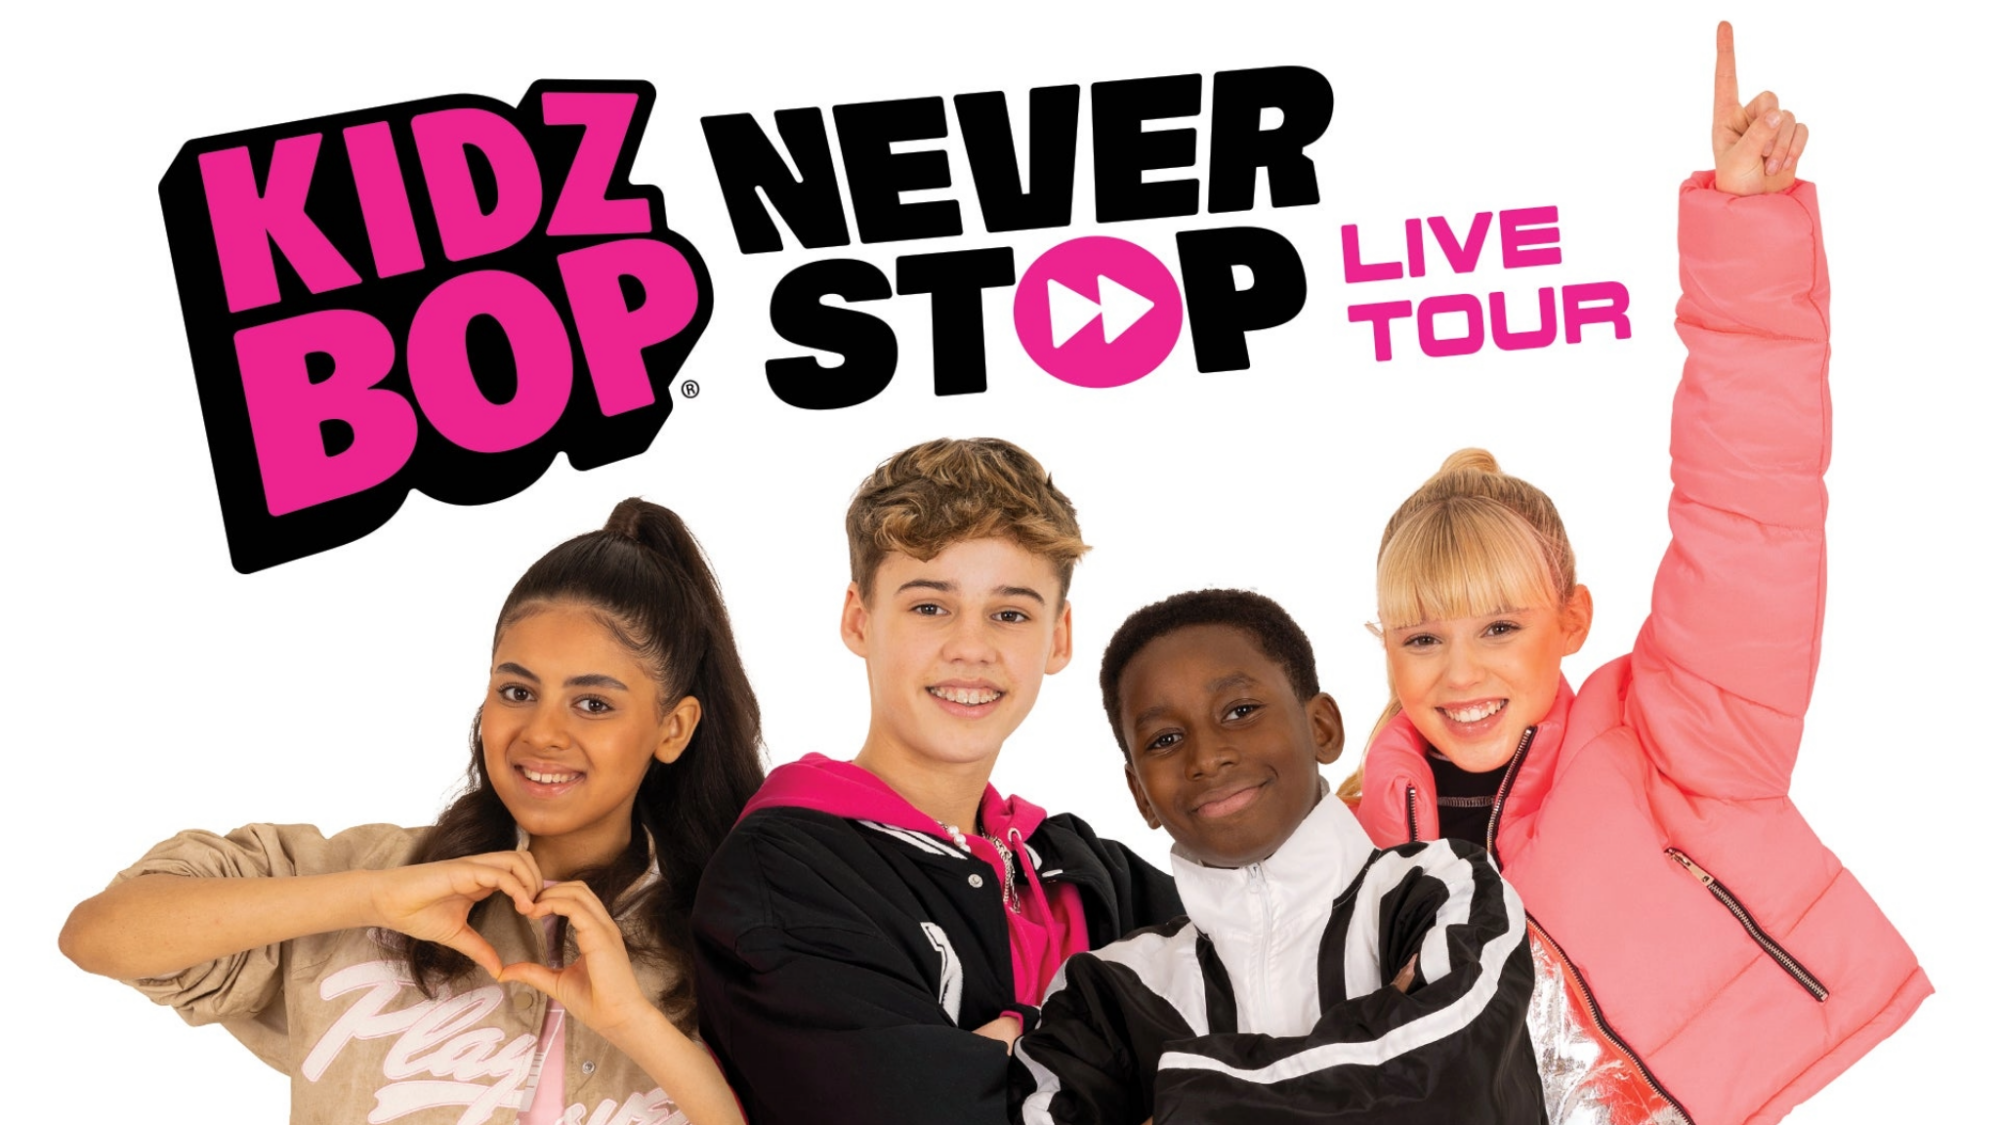 Image name KIDZ BOP Never Stop Live Tour at Sheffield City Hall Oval Hall Sheffield the 1 image from the post KIDZ BOP NEVER STOP TOUR at York Barbican, York in Yorkshire.com.